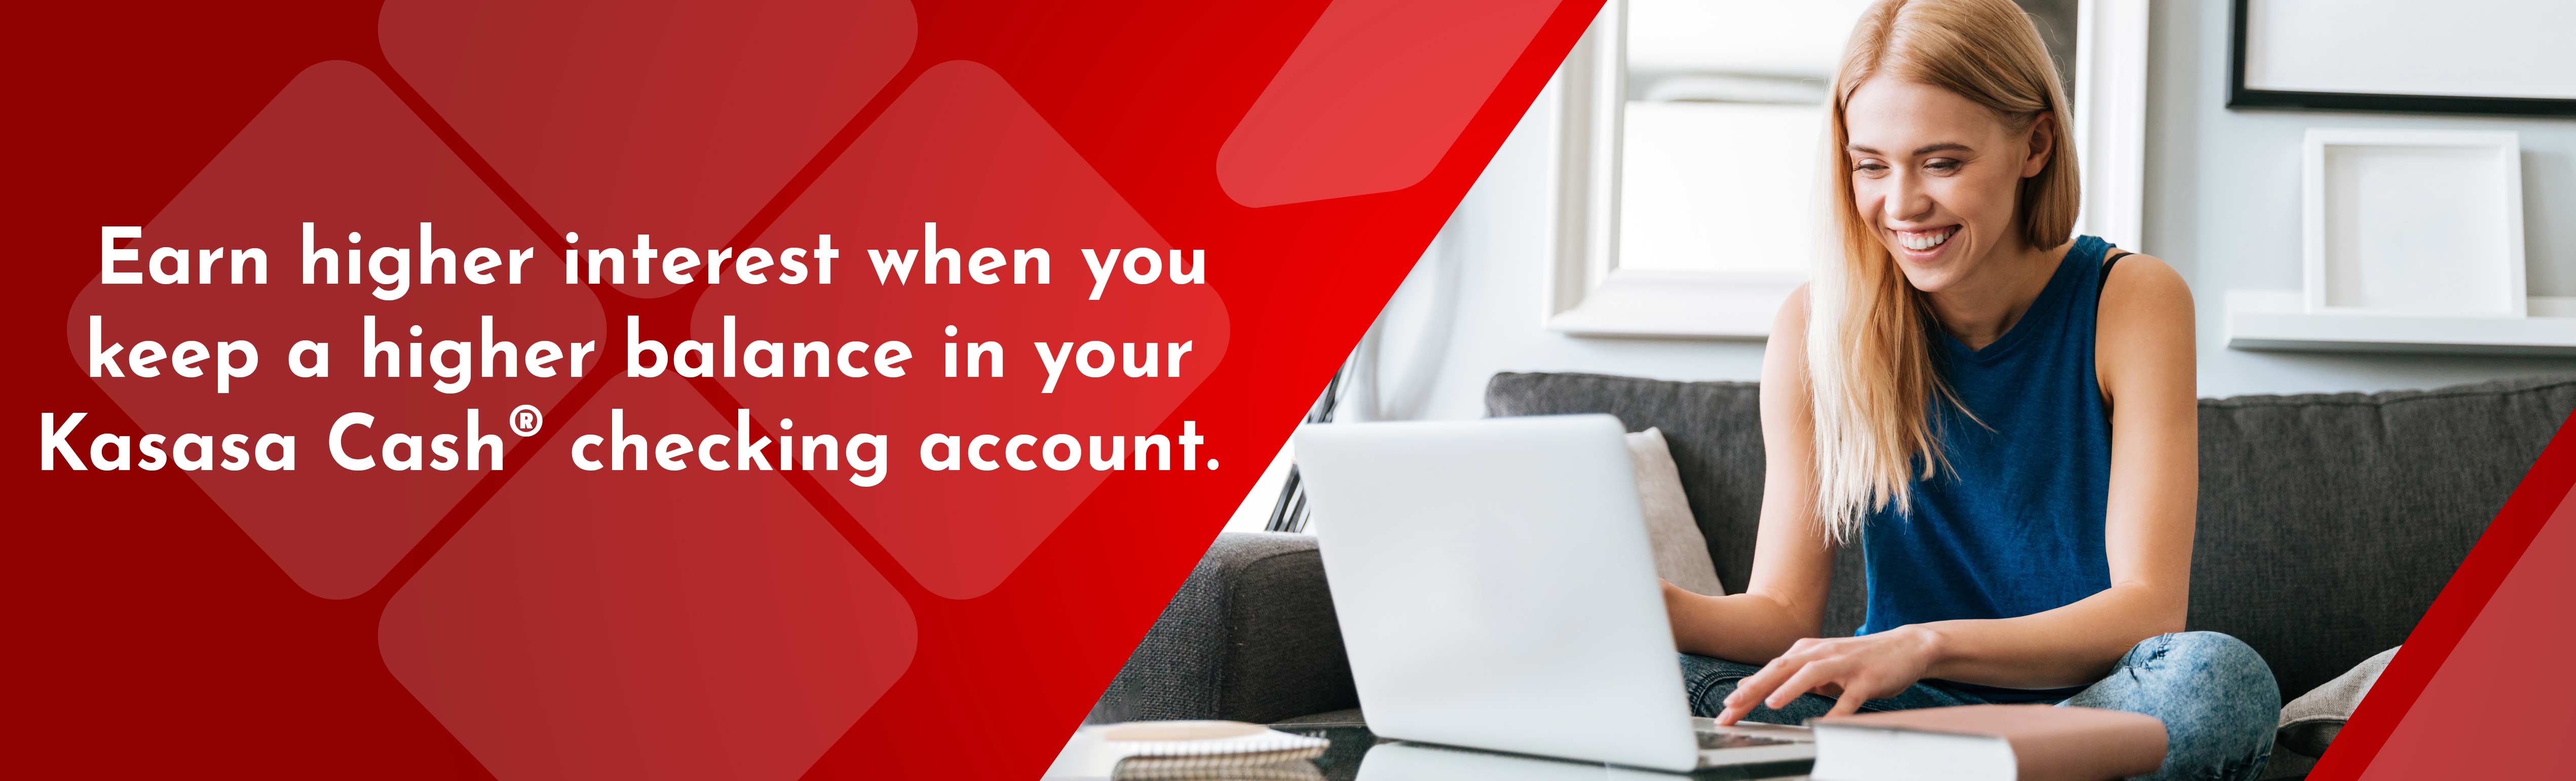 Earn higher interest when you keep a higher balance in your Kasasa Cash checking account.